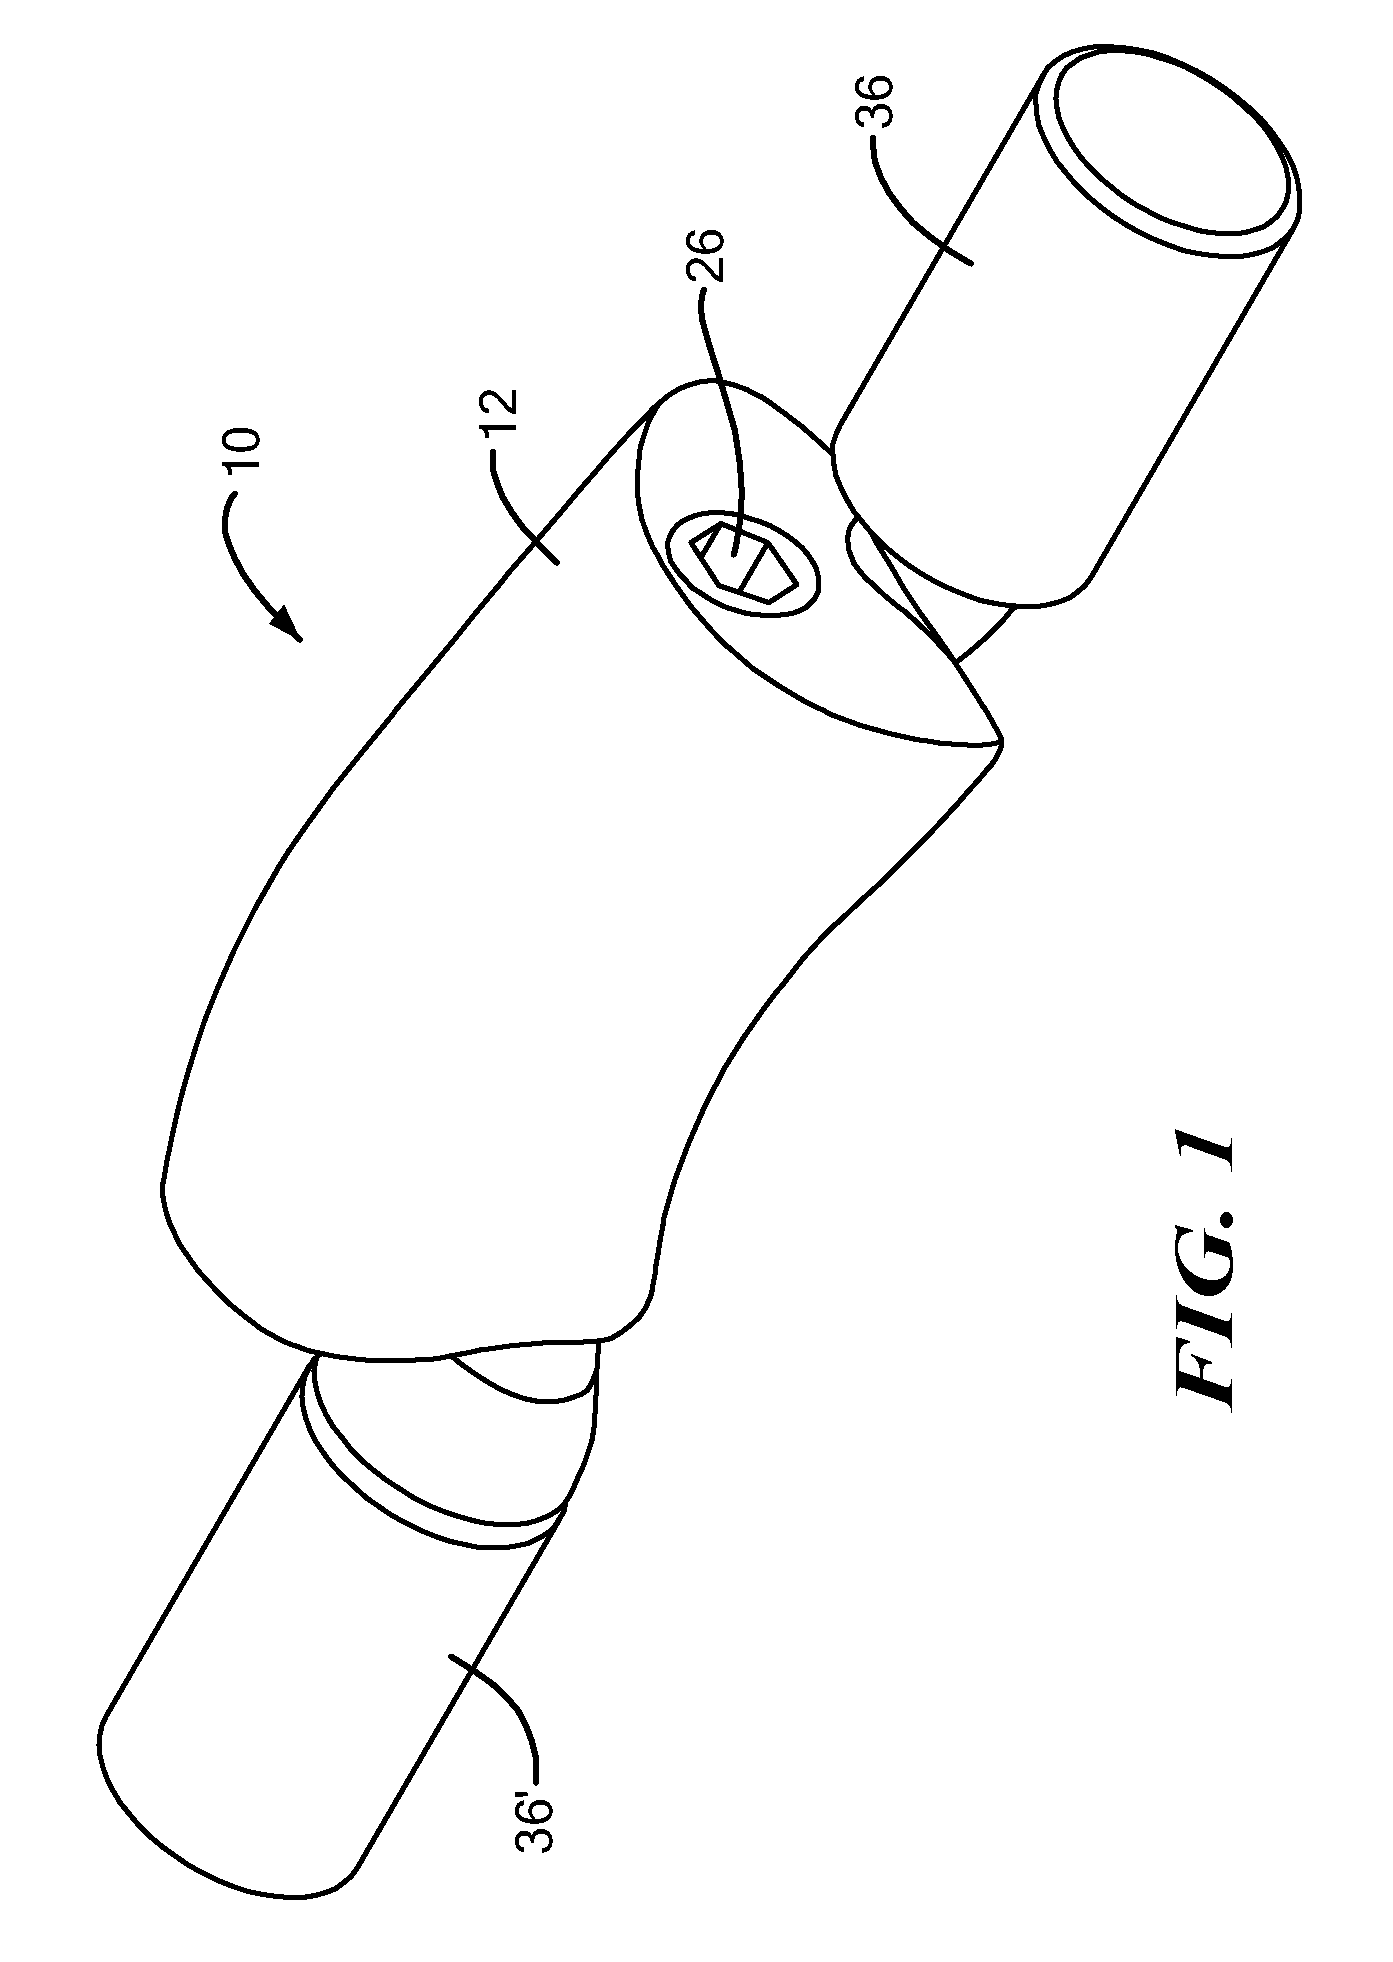 Dynamic connector for spinal device